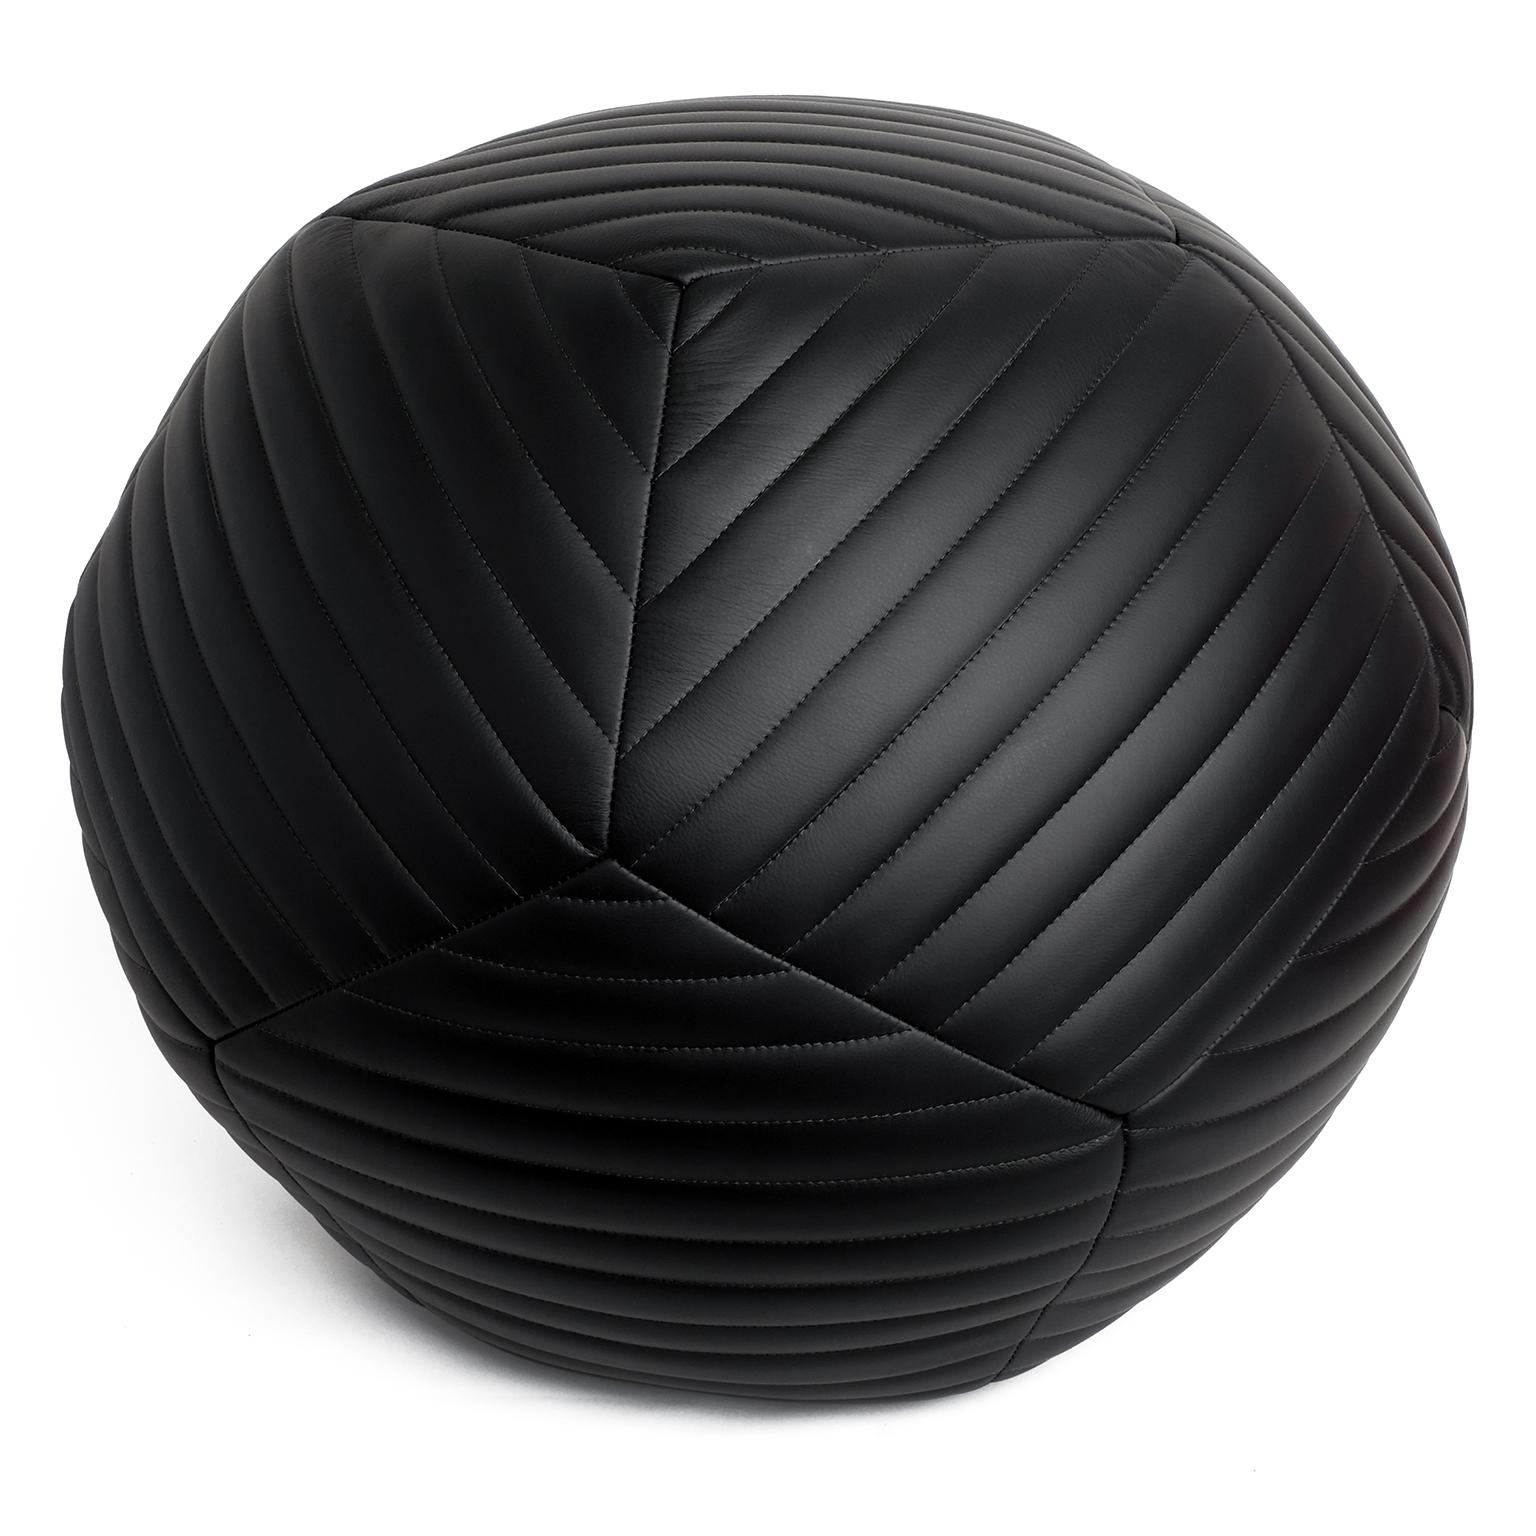 Featured with diamond banded detailing, the Diamond Ottoman is inspired by fundamental geometry. These structured and supportive round ball ottomans are designed to function as a traditional leg rest, add a twist to secondary living room seating, or